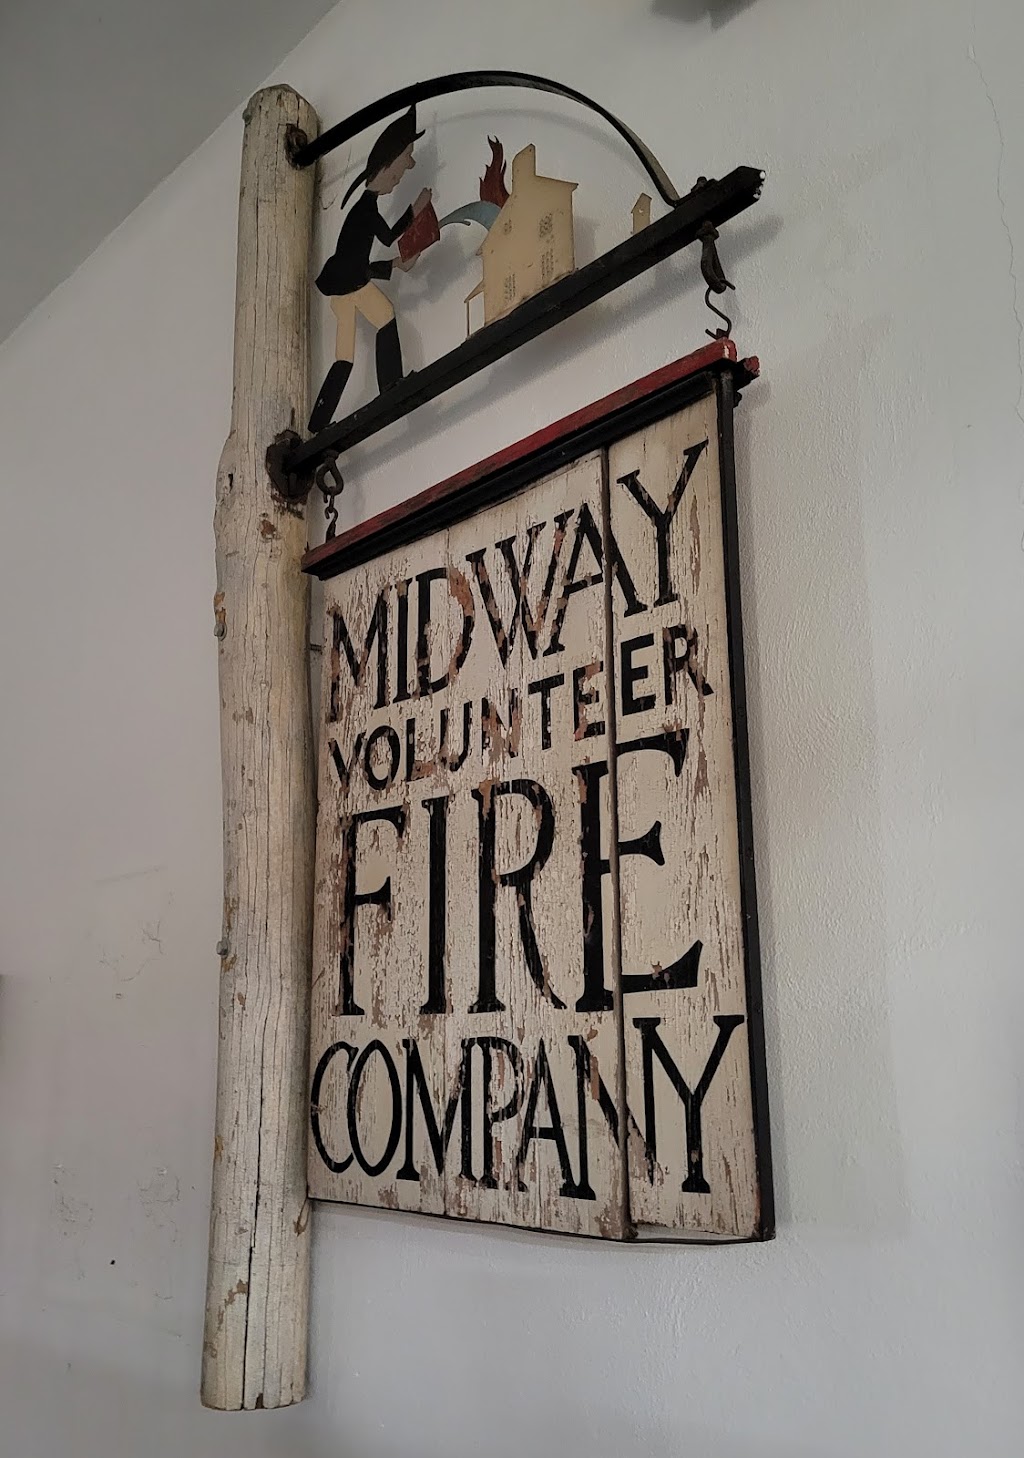 Midway Volunteer Fire Co Station 5 | 5770 US-202, New Hope, PA 18938 | Phone: (215) 794-5612